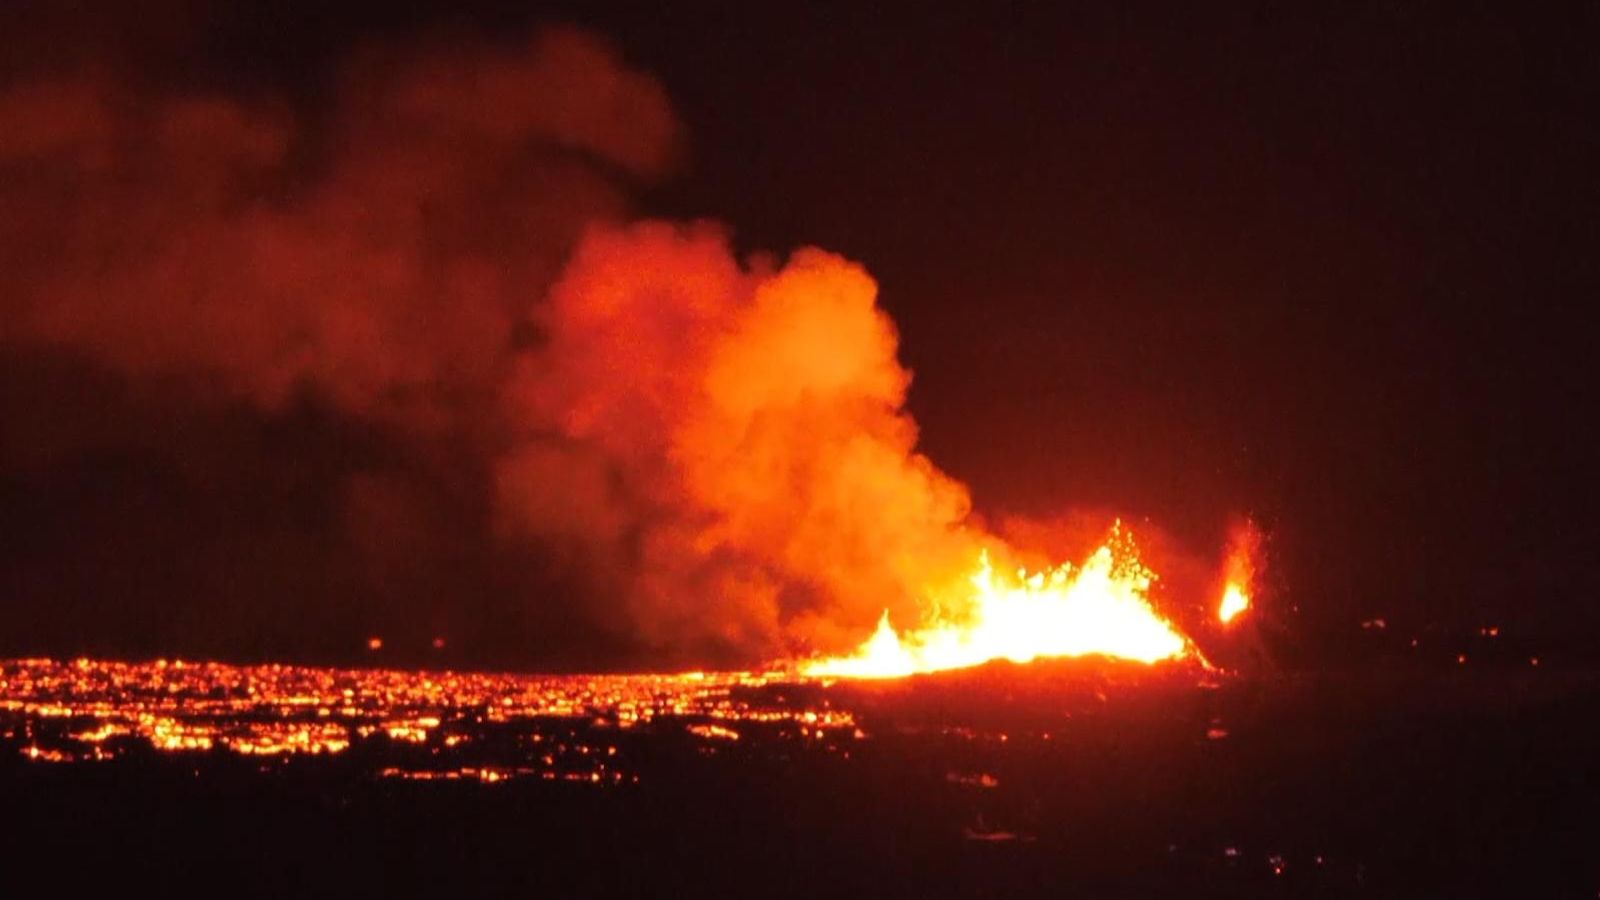 Embers of a dying fire: Surprise and relief as Iceland volcano simmers down